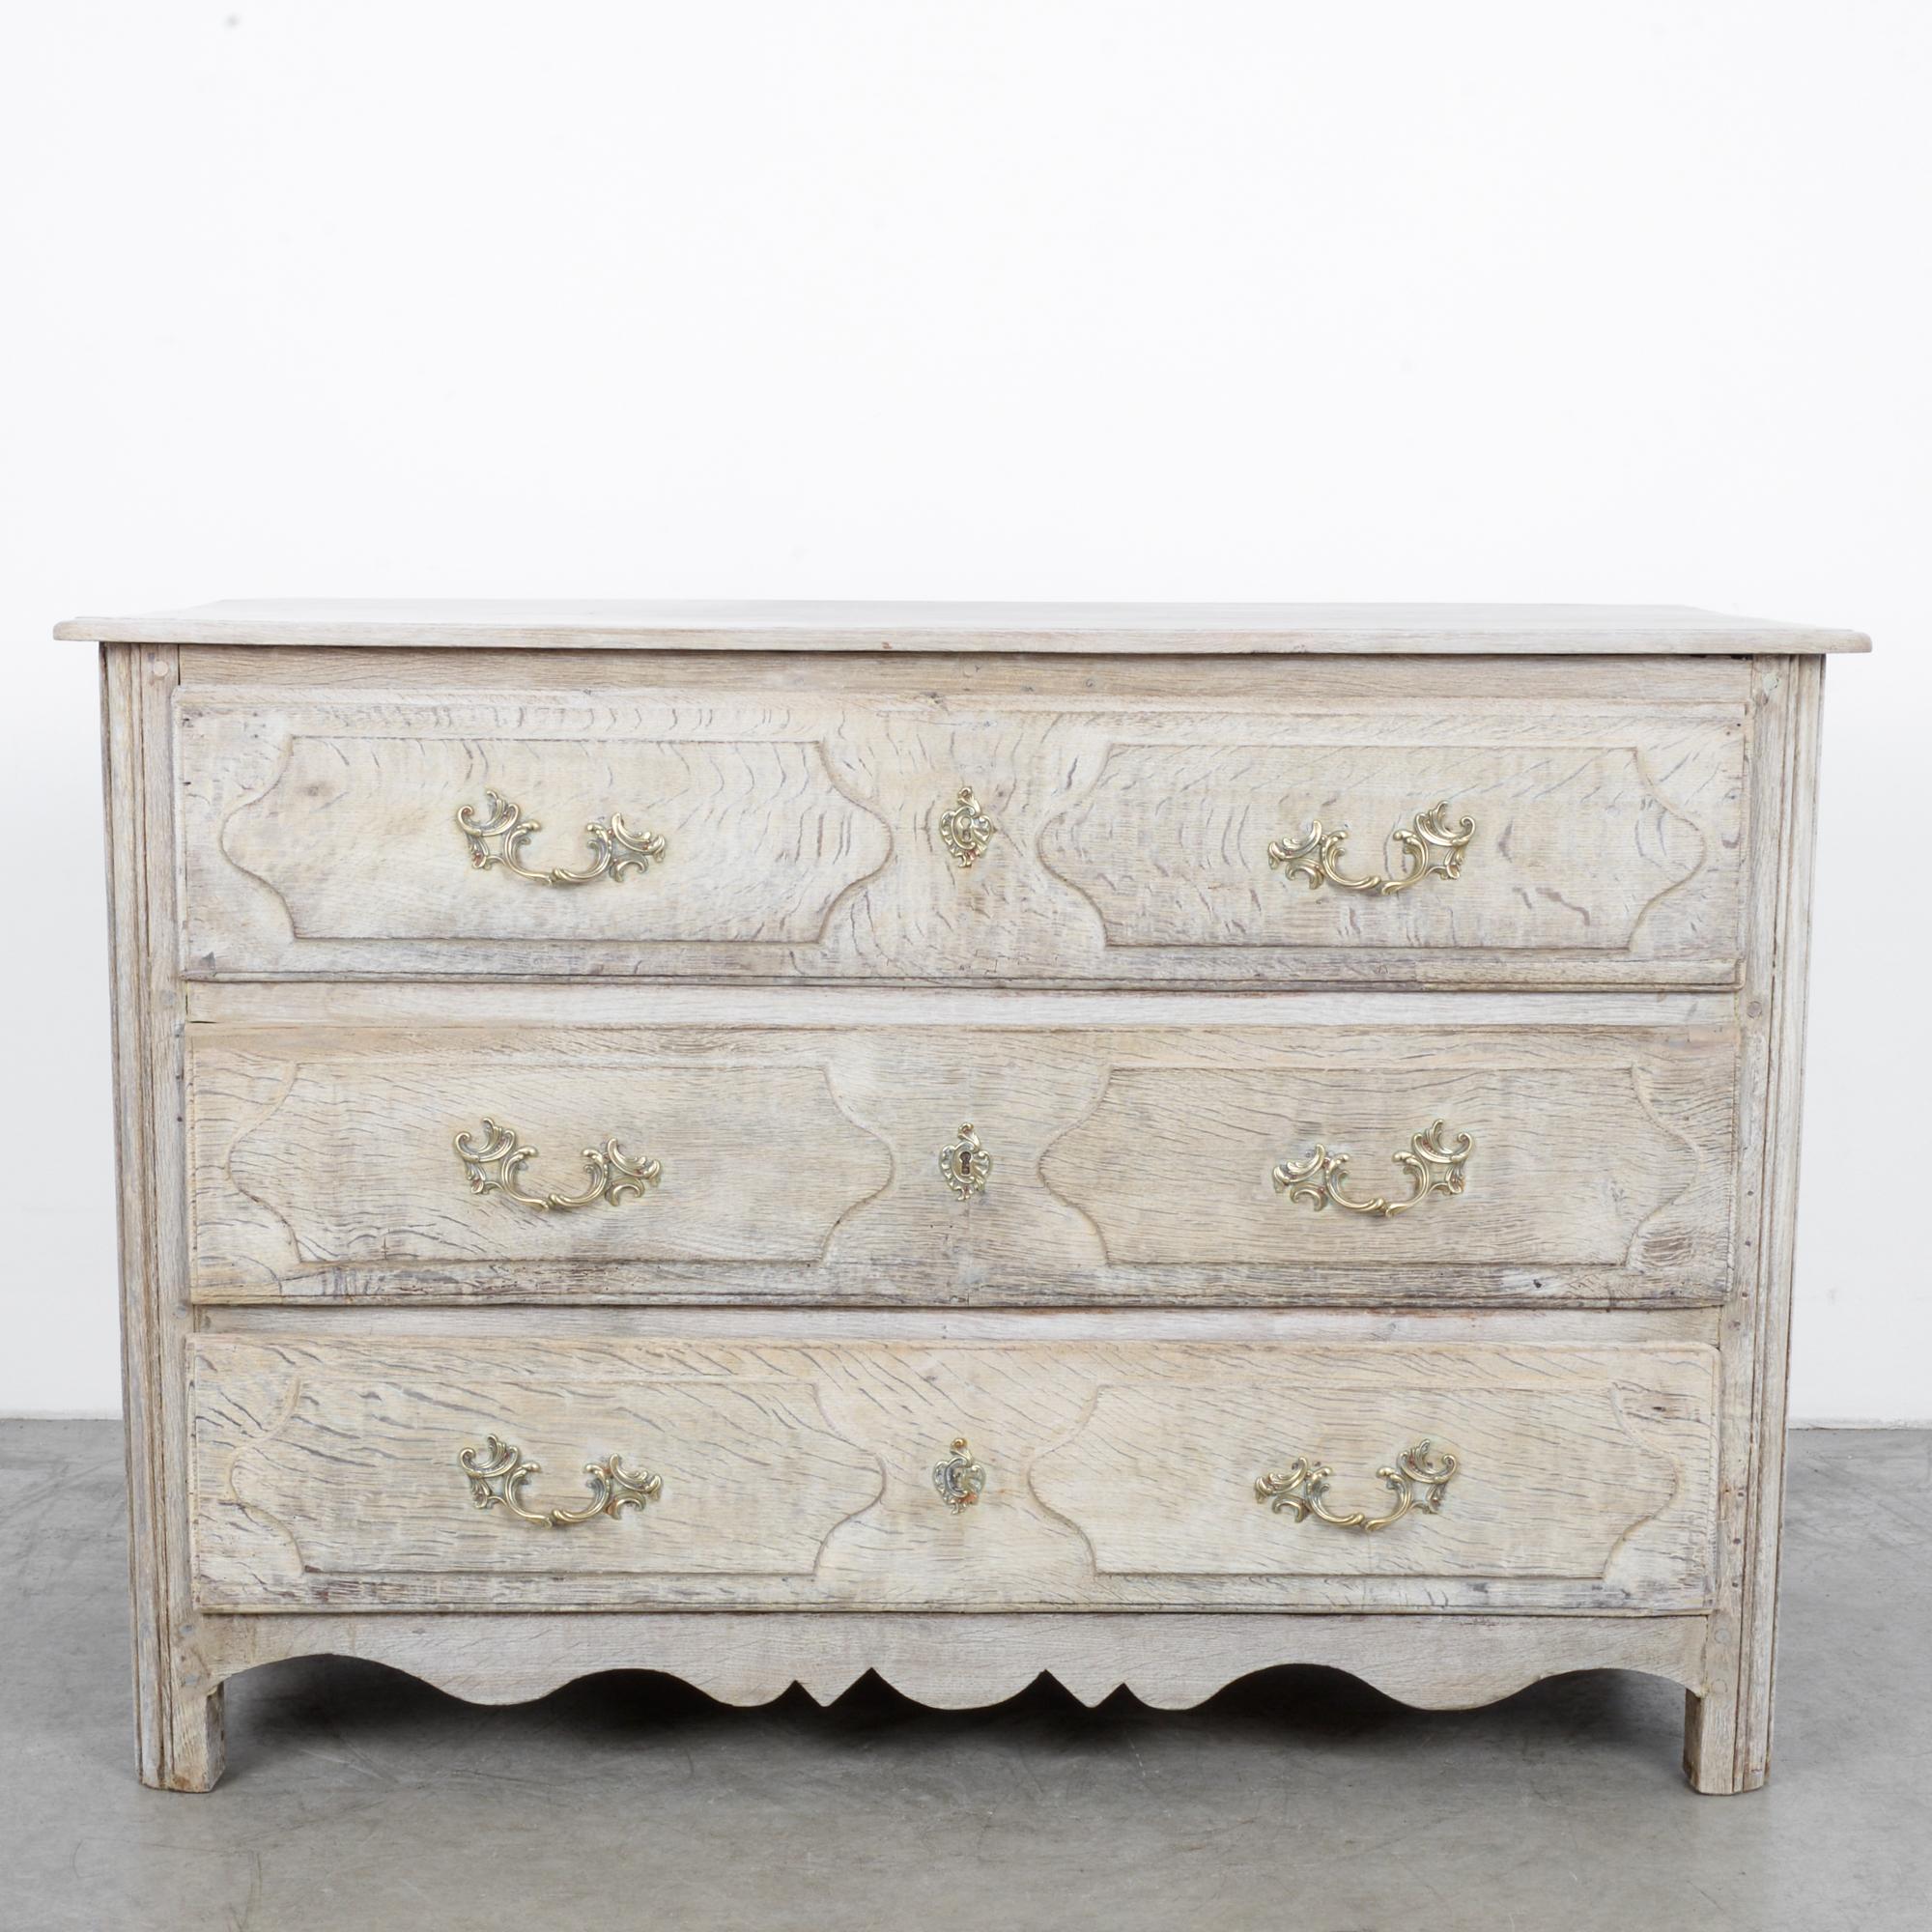 A French oak chest of drawers, circa 1840. These three oak drawers with gilt bronze escutcheons are undergirded by a scrolled apron. The rustic design is complemented by the sylvan swirls of the knobs over raised panel drawer fronts.